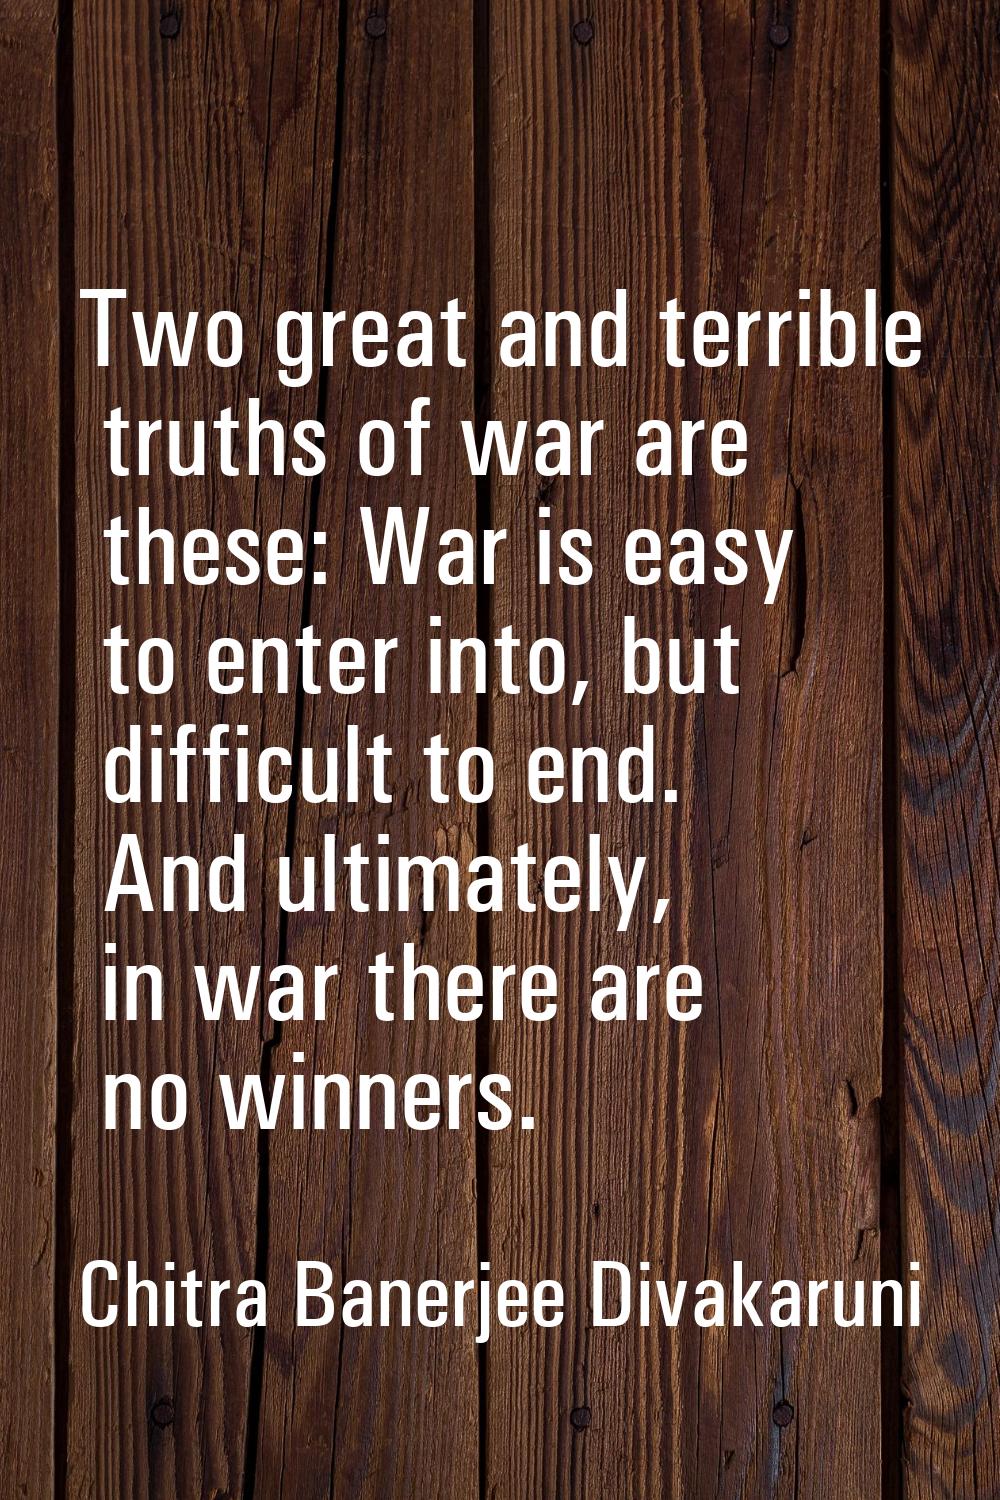 Two great and terrible truths of war are these: War is easy to enter into, but difficult to end. An